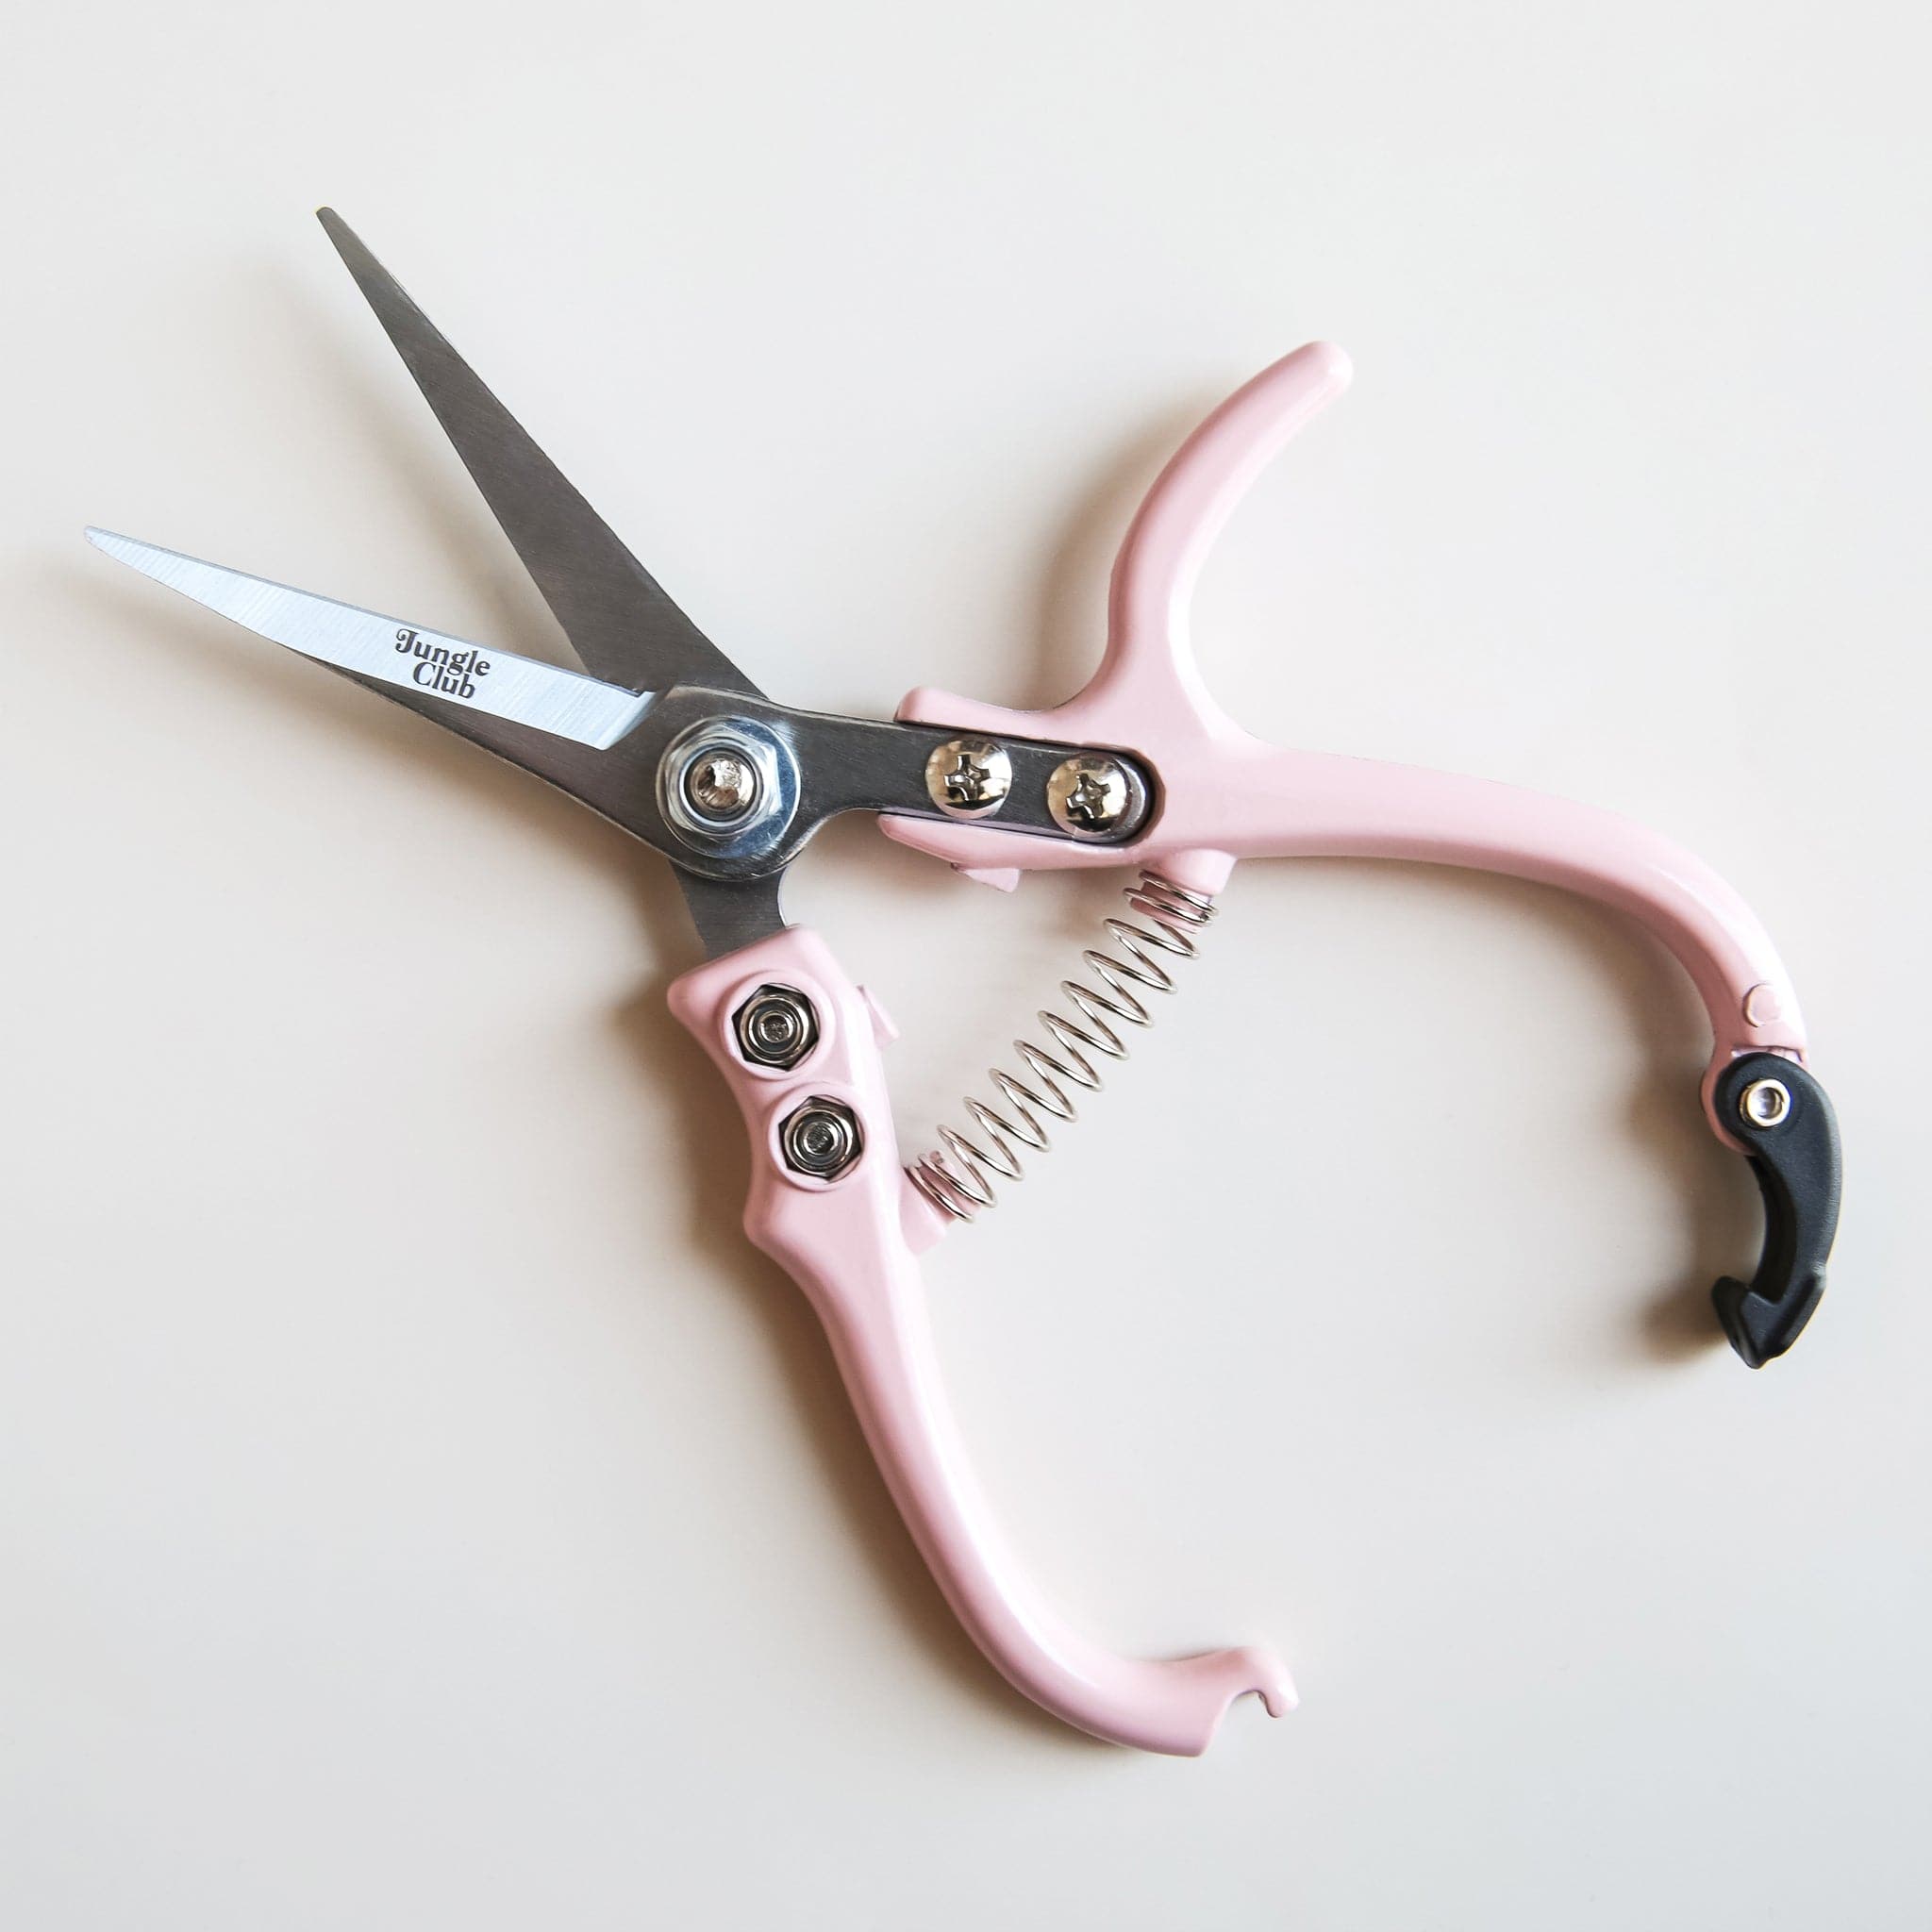 Pair of pruning shears with pastel pink handles and metal blades positioned open. The outer blade reads 'jungle club' in small, playful lettering. The back clasp of the shear handles remain unclipped, allowing for the shear blades to be open. 